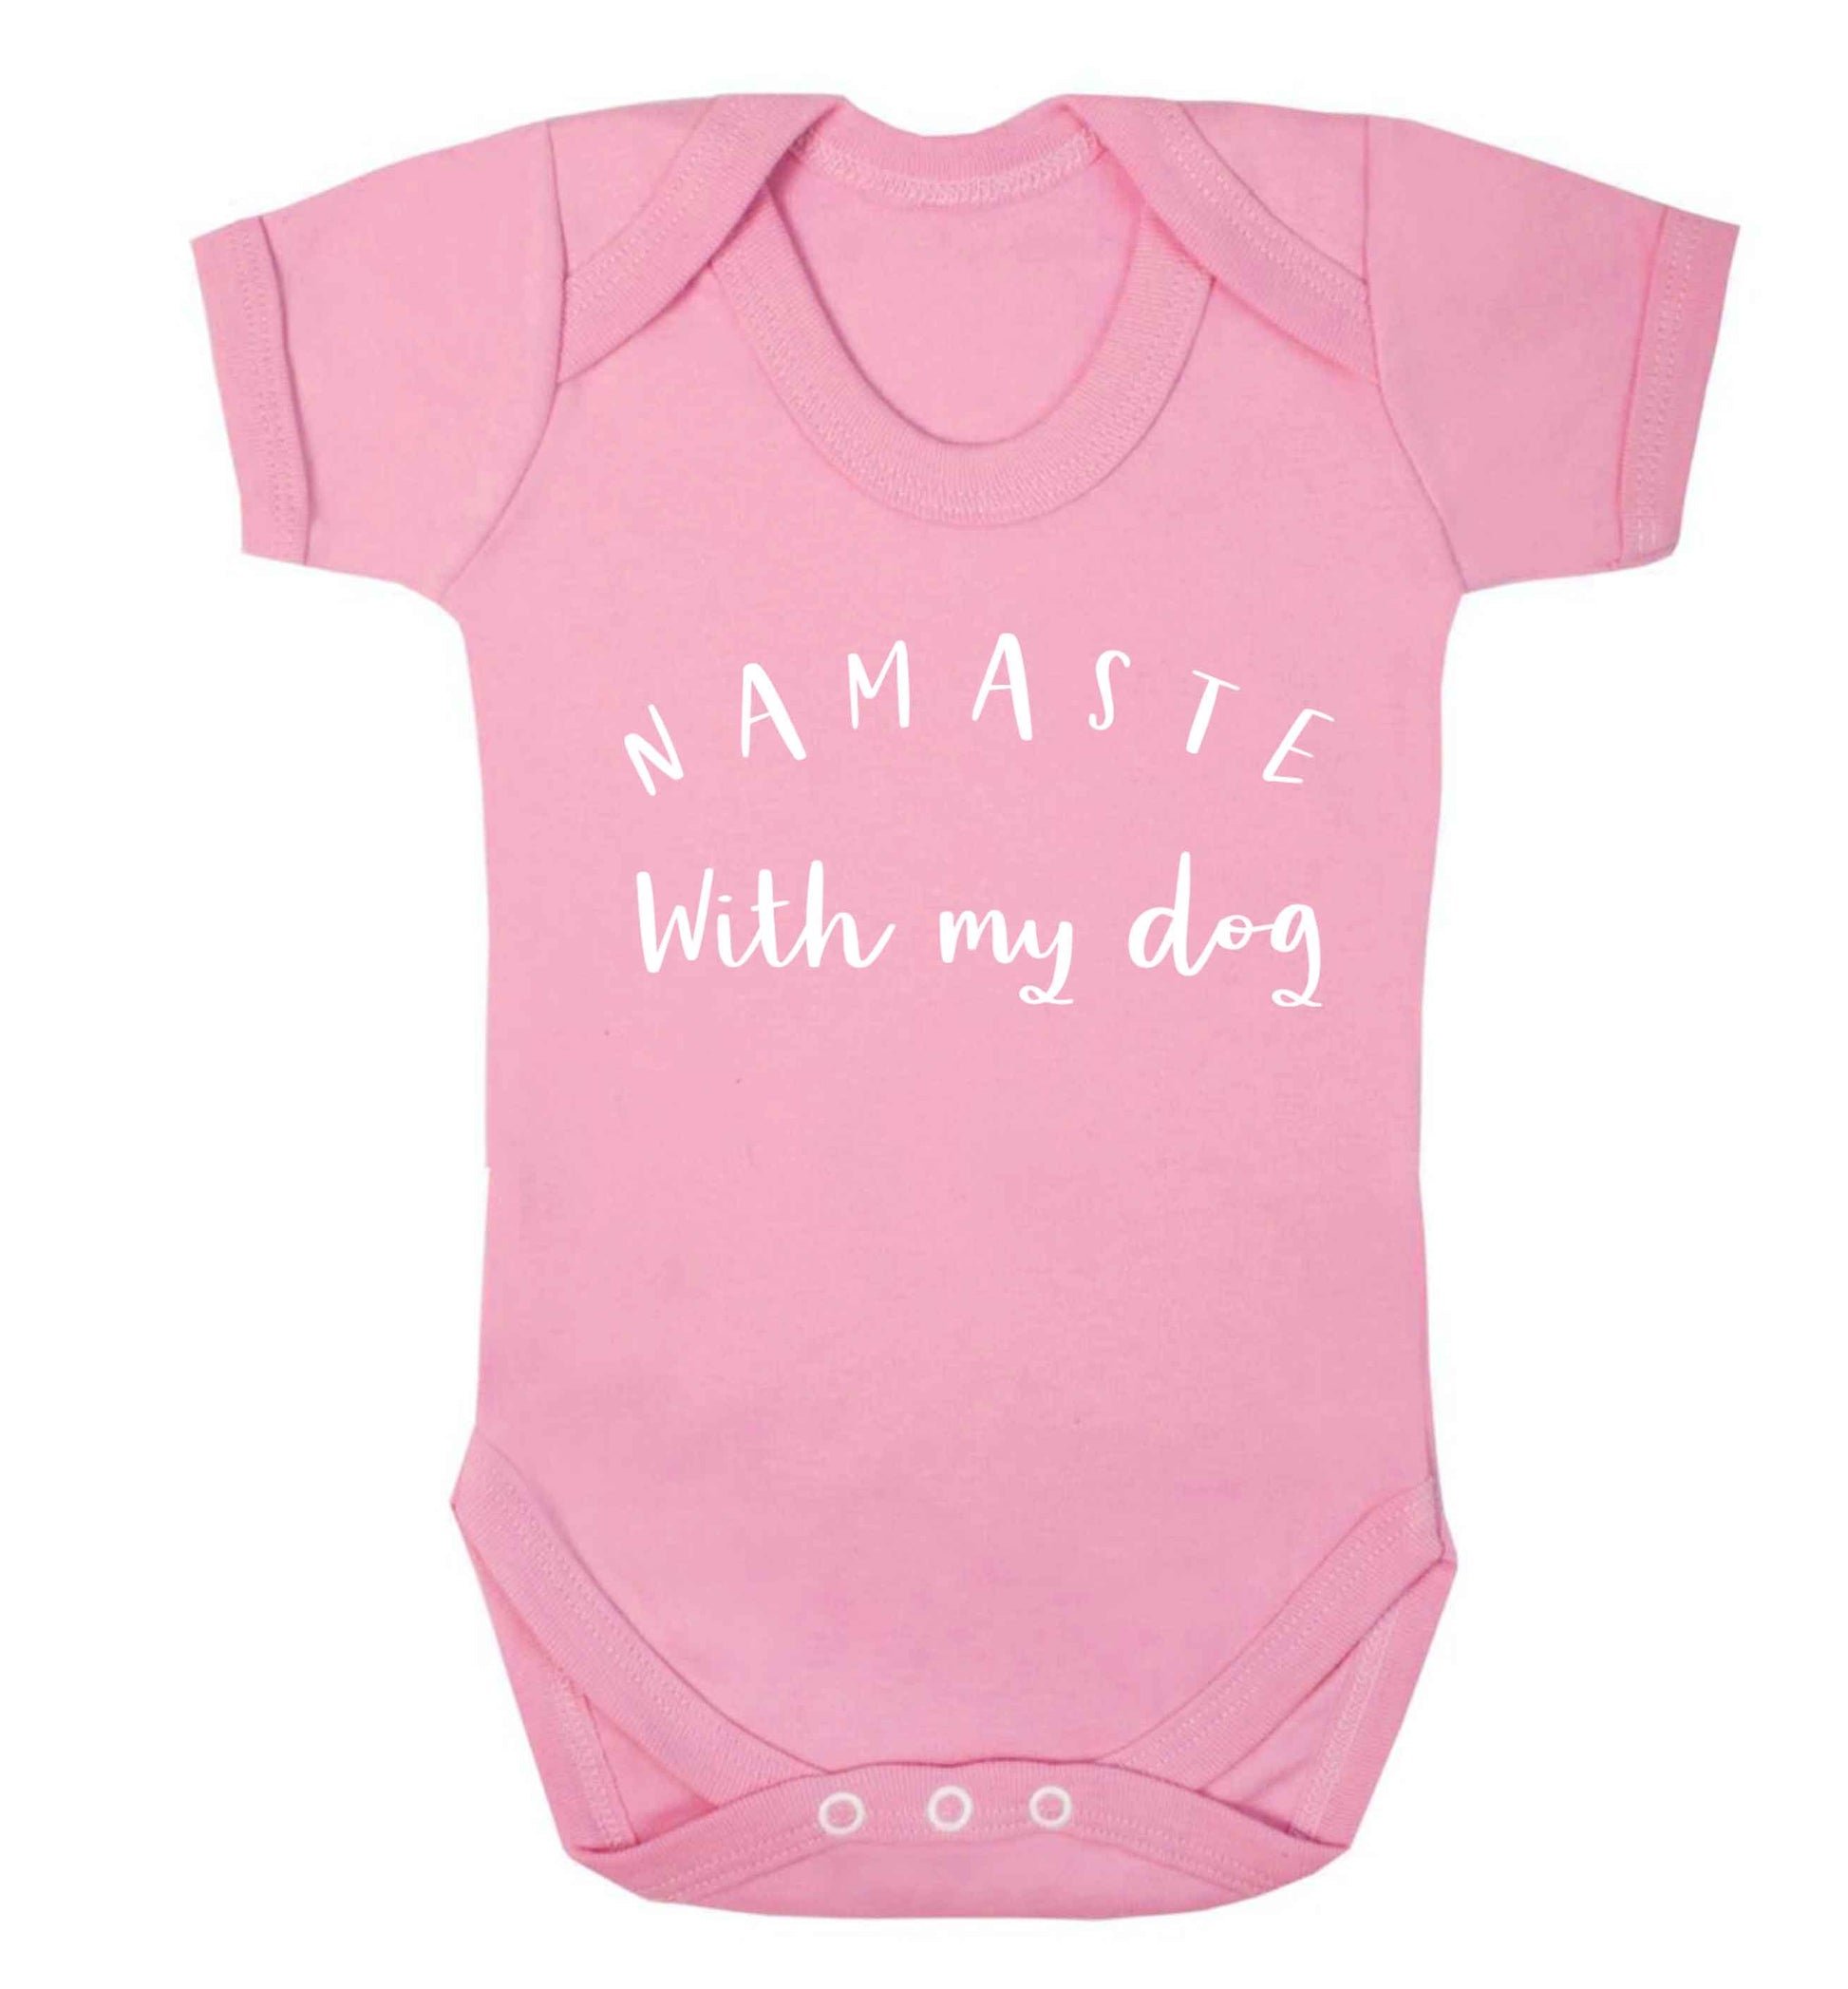 Namaste with my dog Baby Vest pale pink 18-24 months